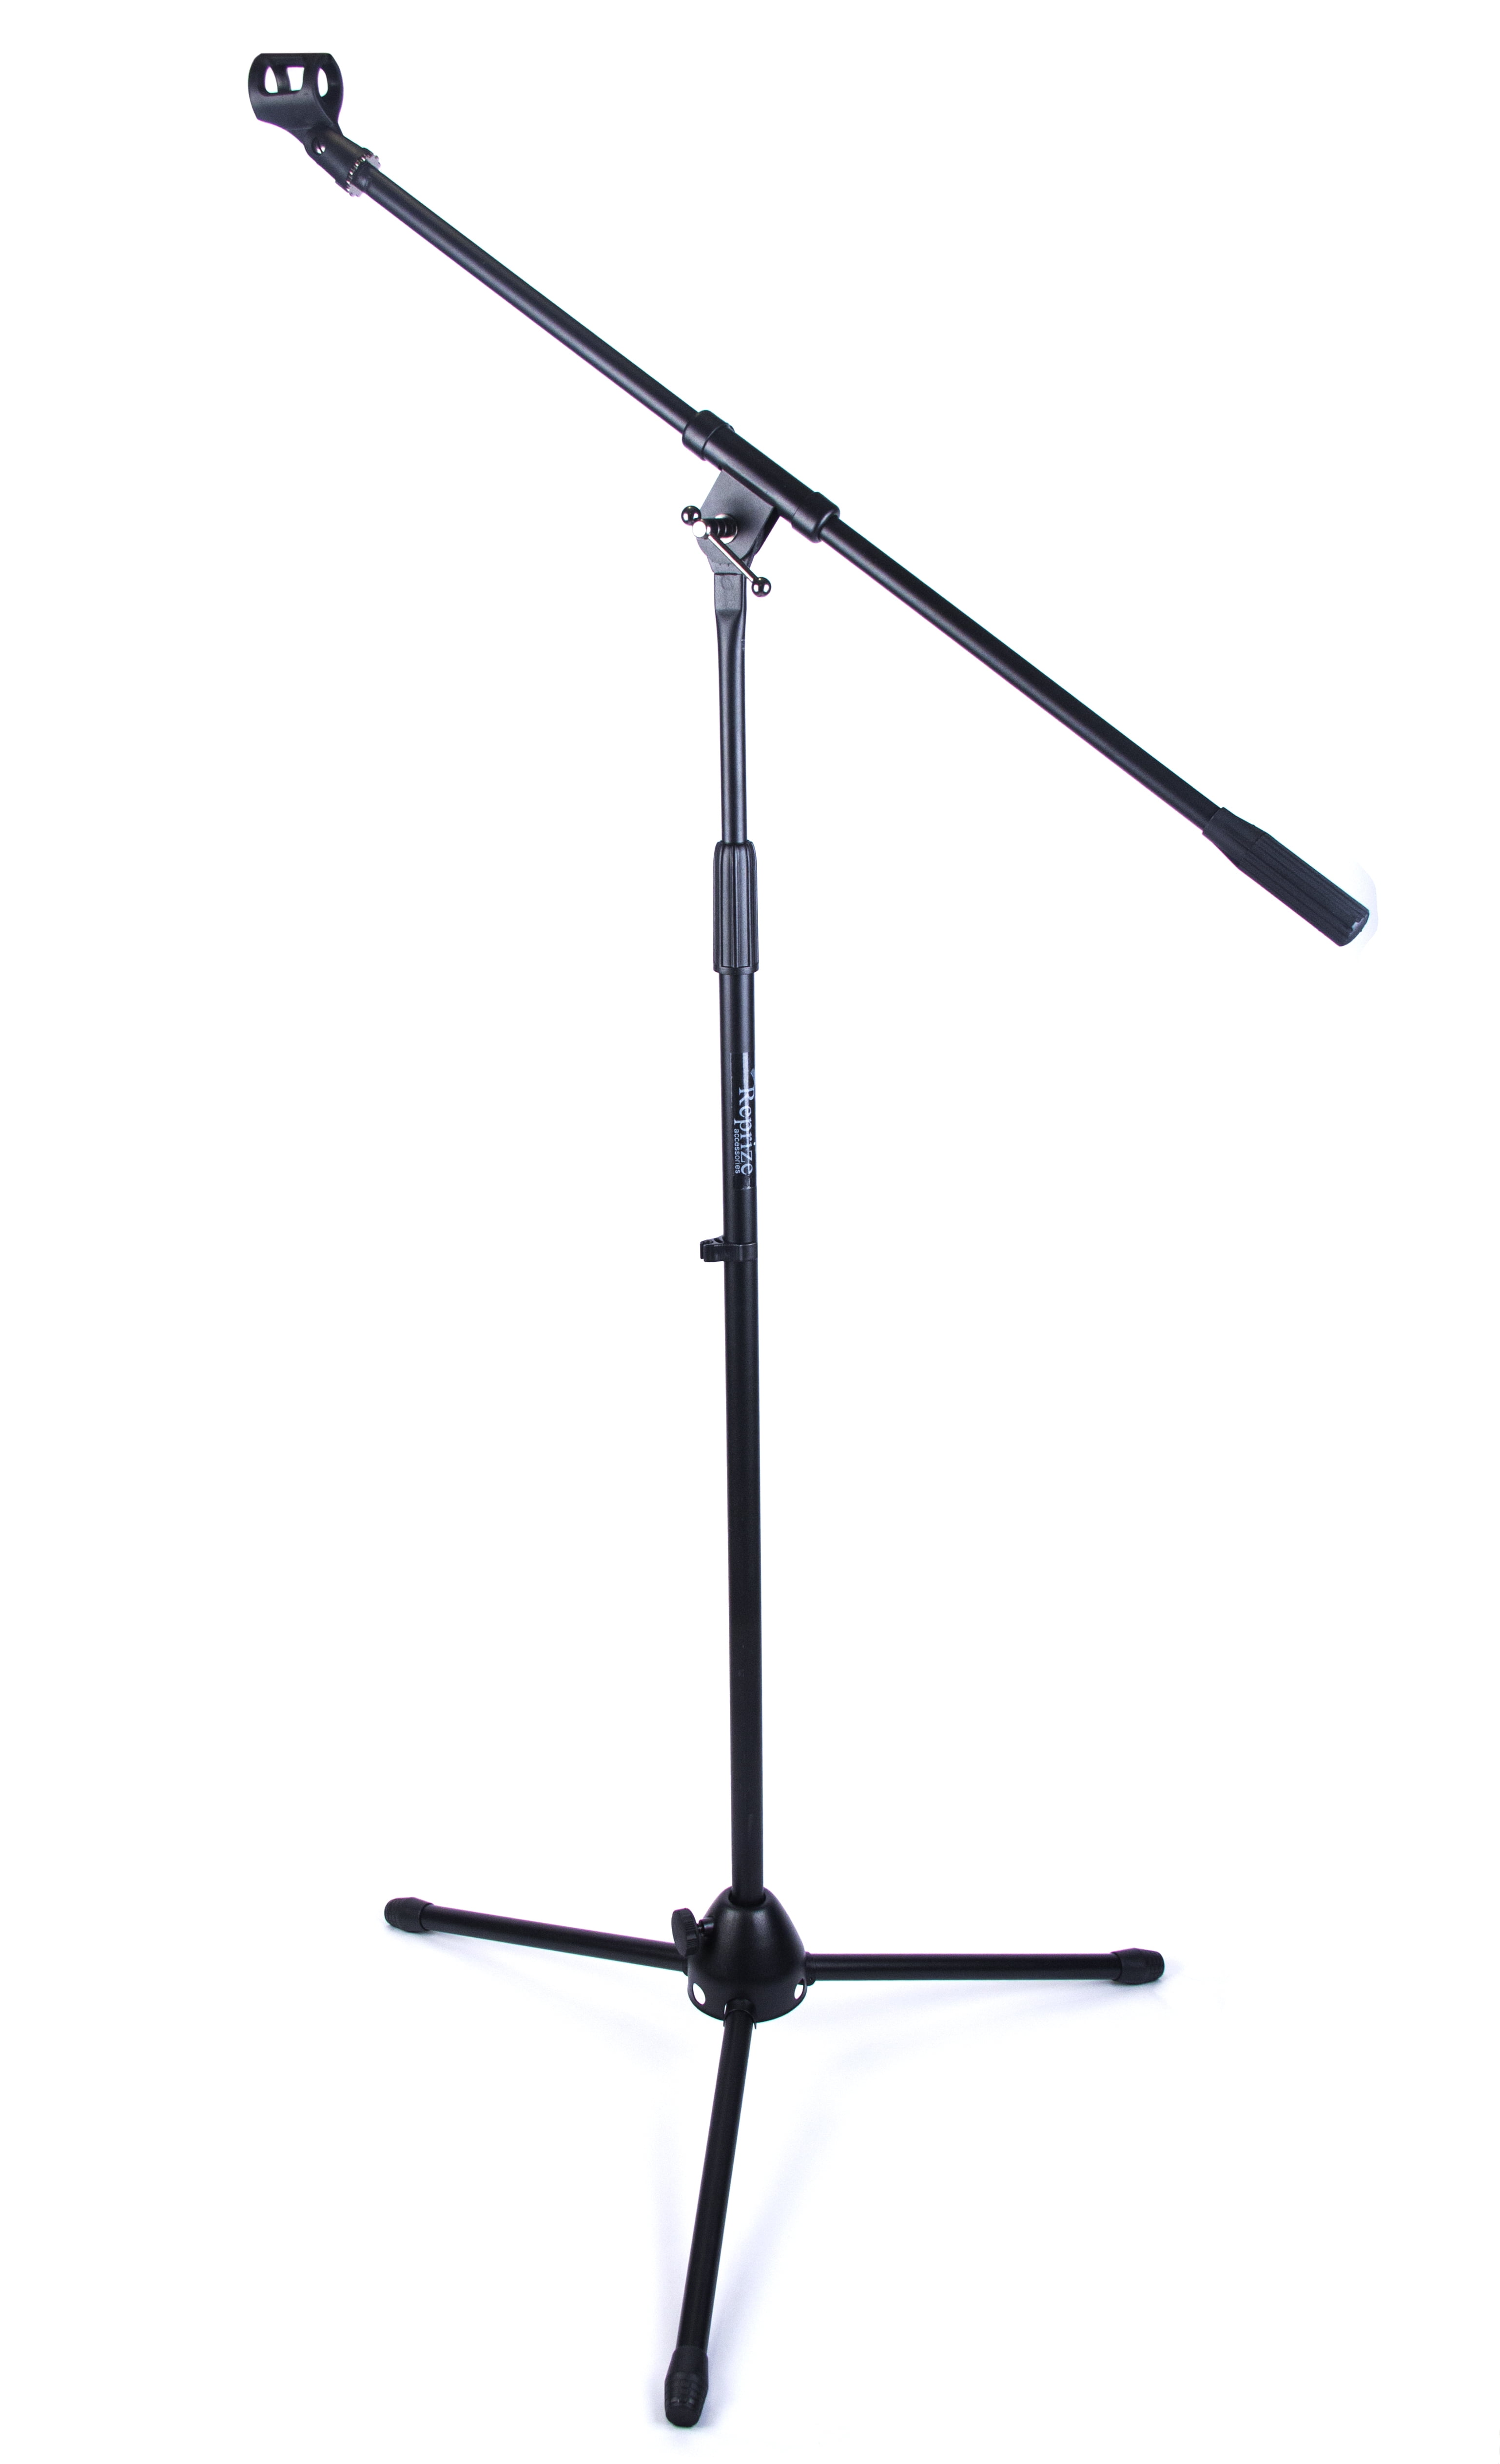 Adjustable & Extendable W/Wheels New PMKS45 Universal Tripod Microphone Stands 